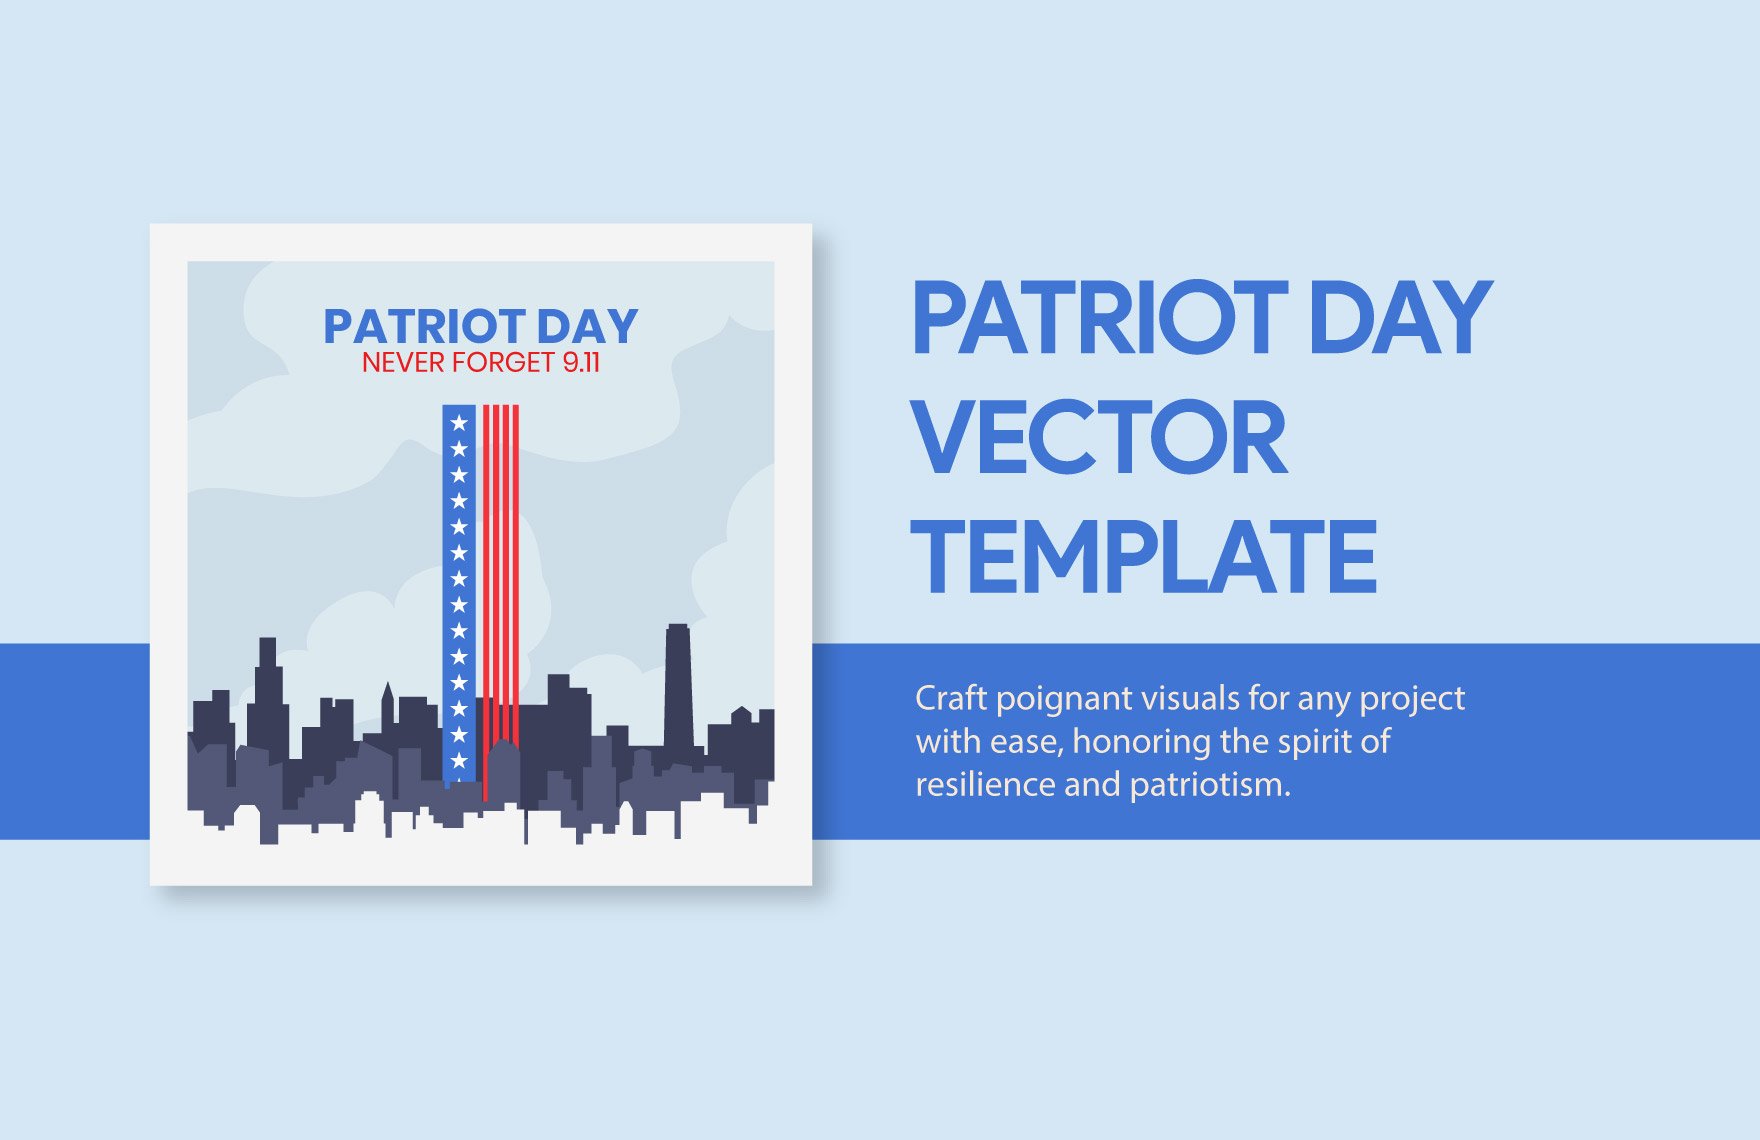 Free Patriot Day Vector in Illustrator, PSD, PNG